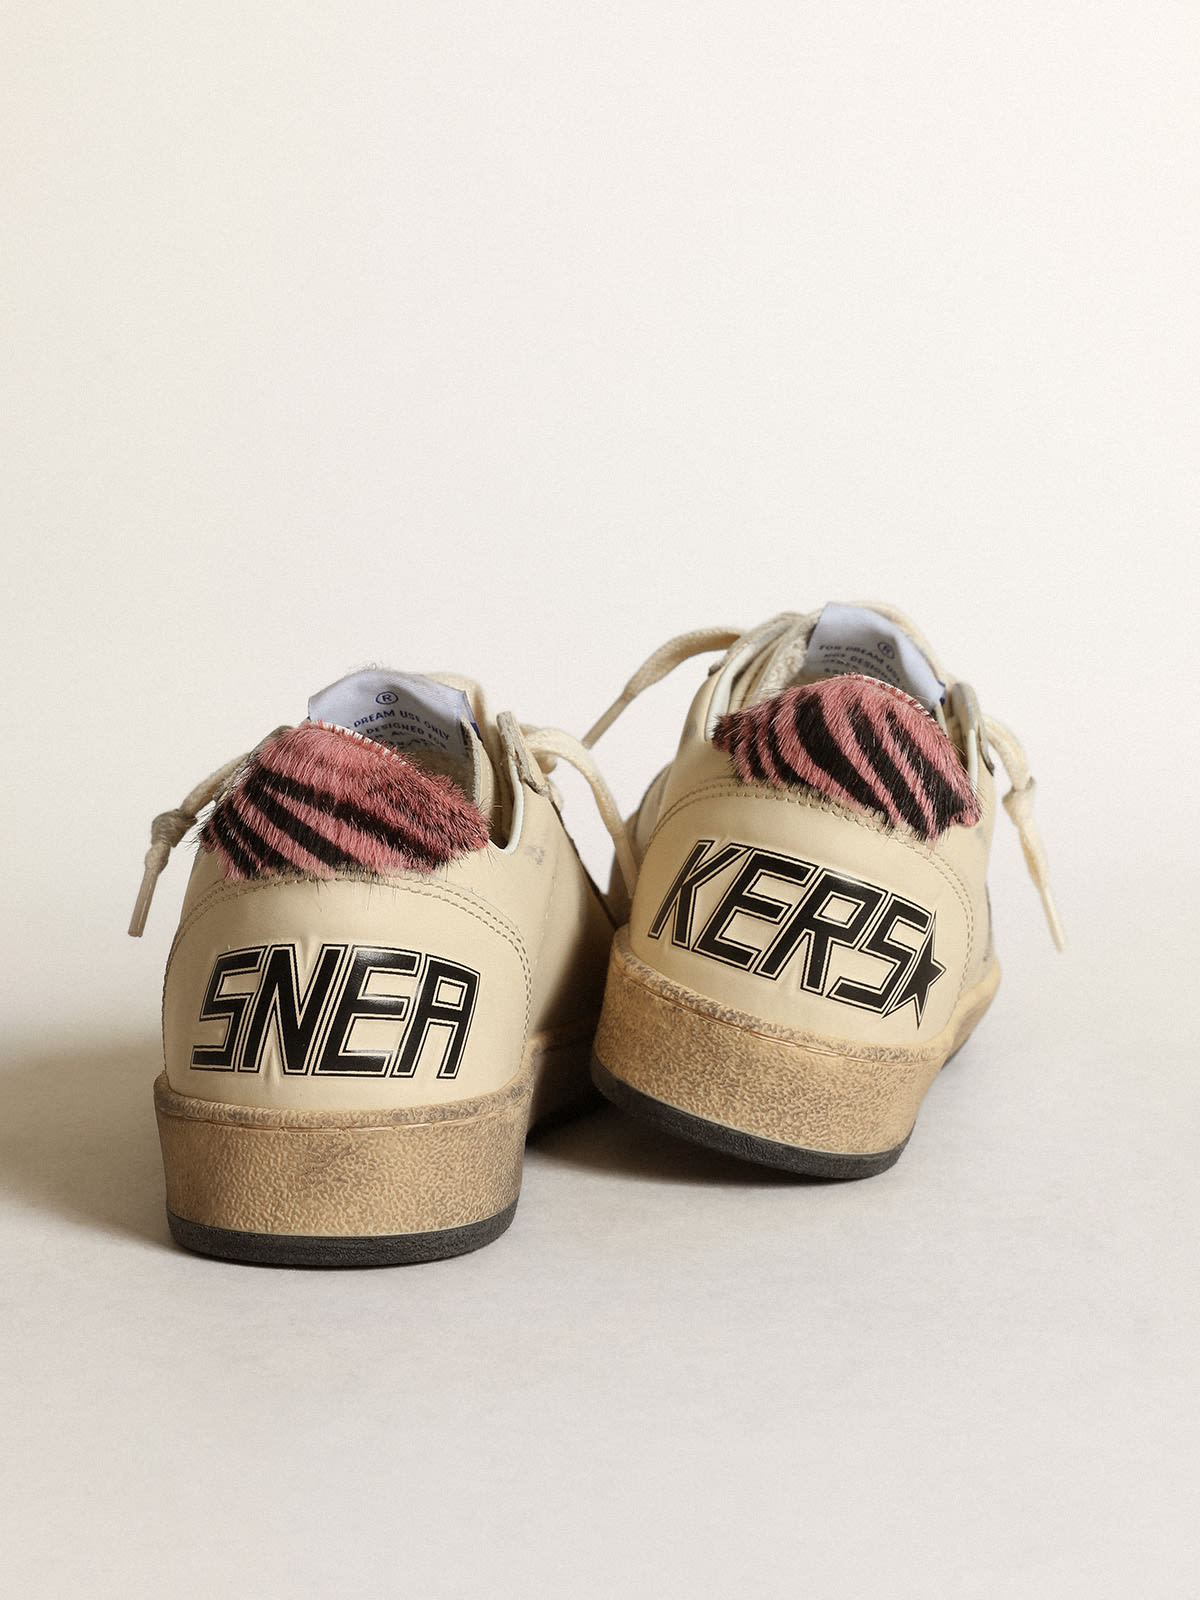 Ball Star LTD sneakers in ivory leather with pink and black zebra-print  pony skin heel tab